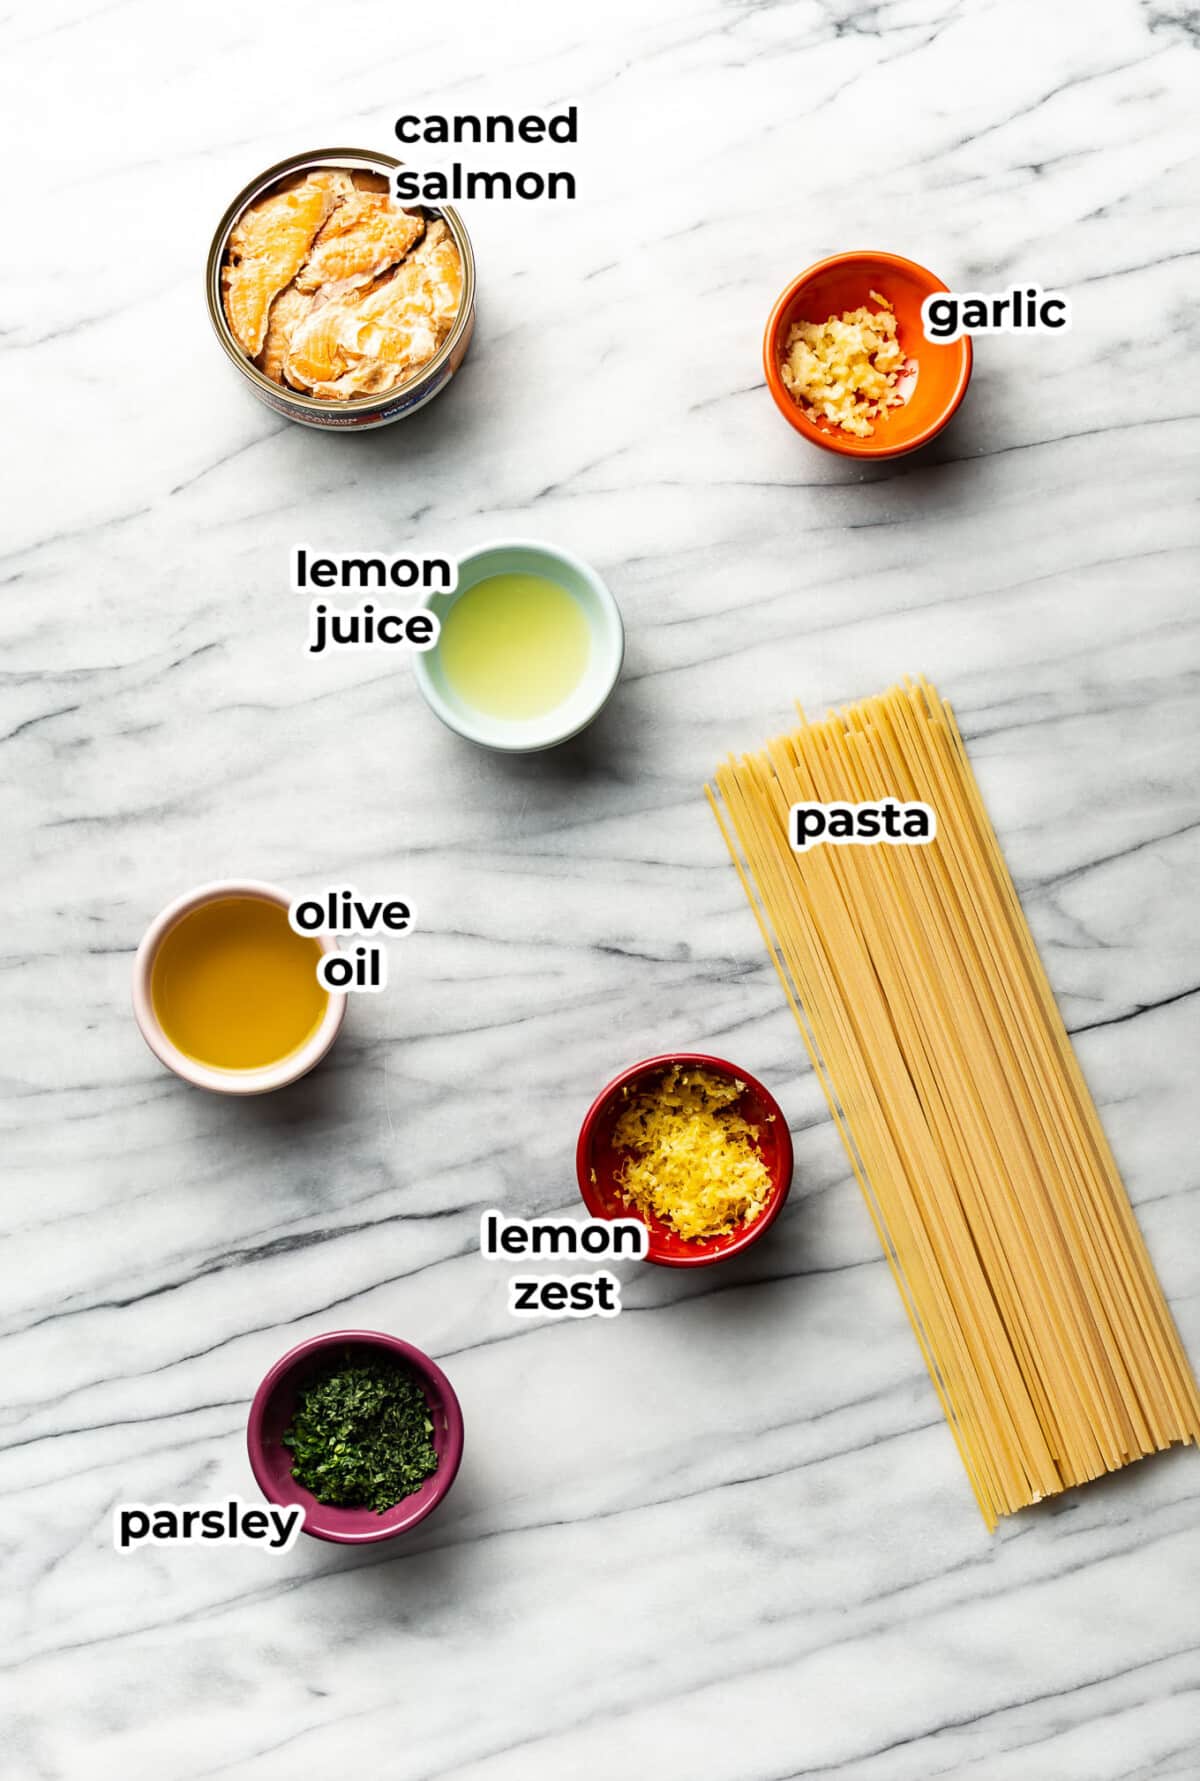 ingredients for canned salmon pasta in prep bowls